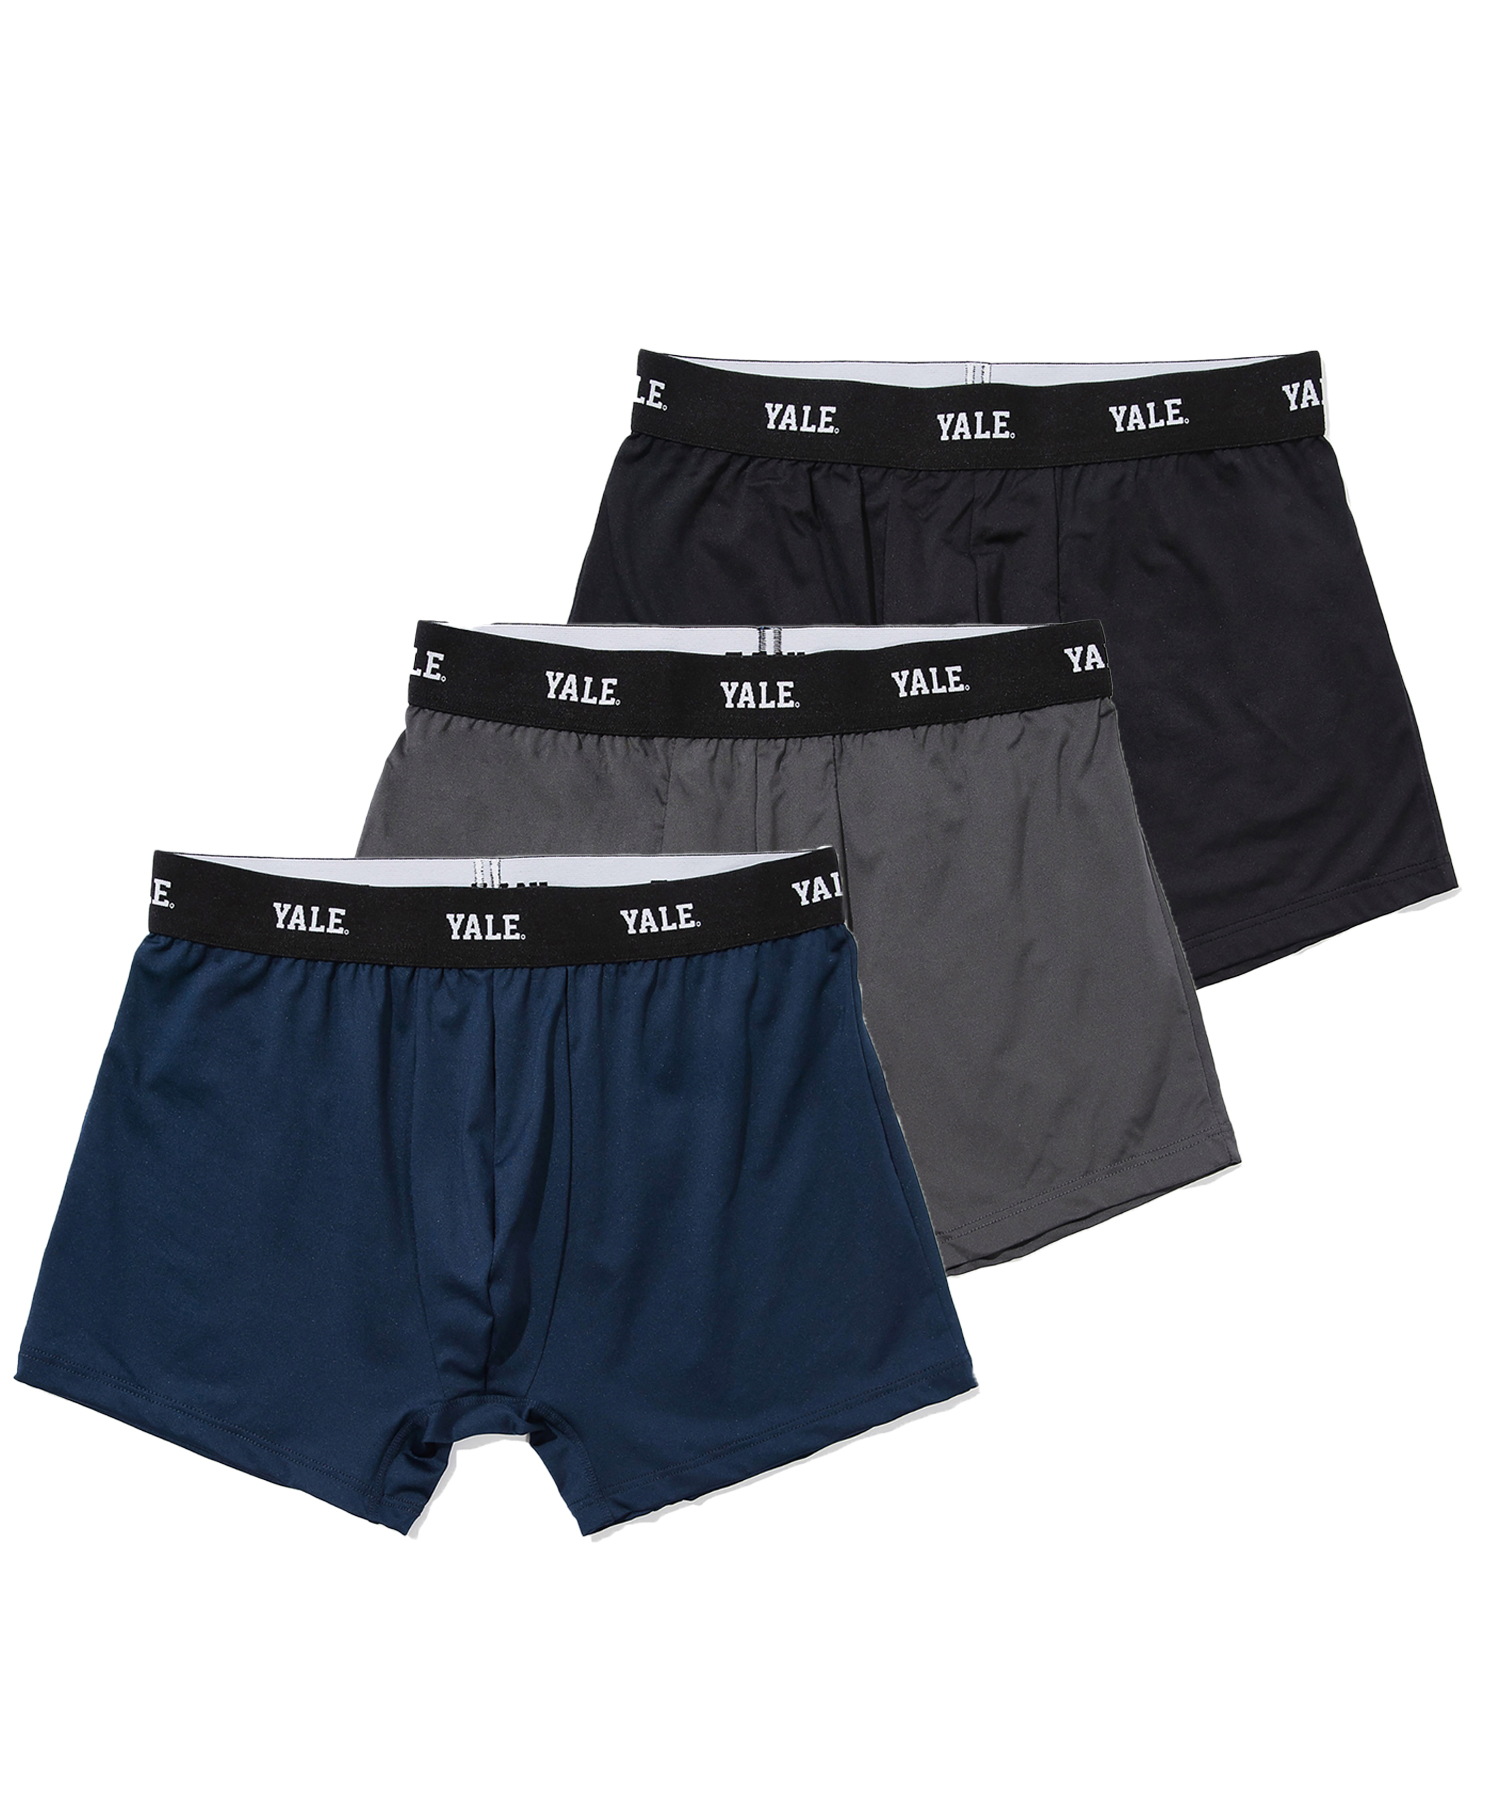 [ONEMILE WEAR] COLD 3PACK DRAWERS PACKAGE